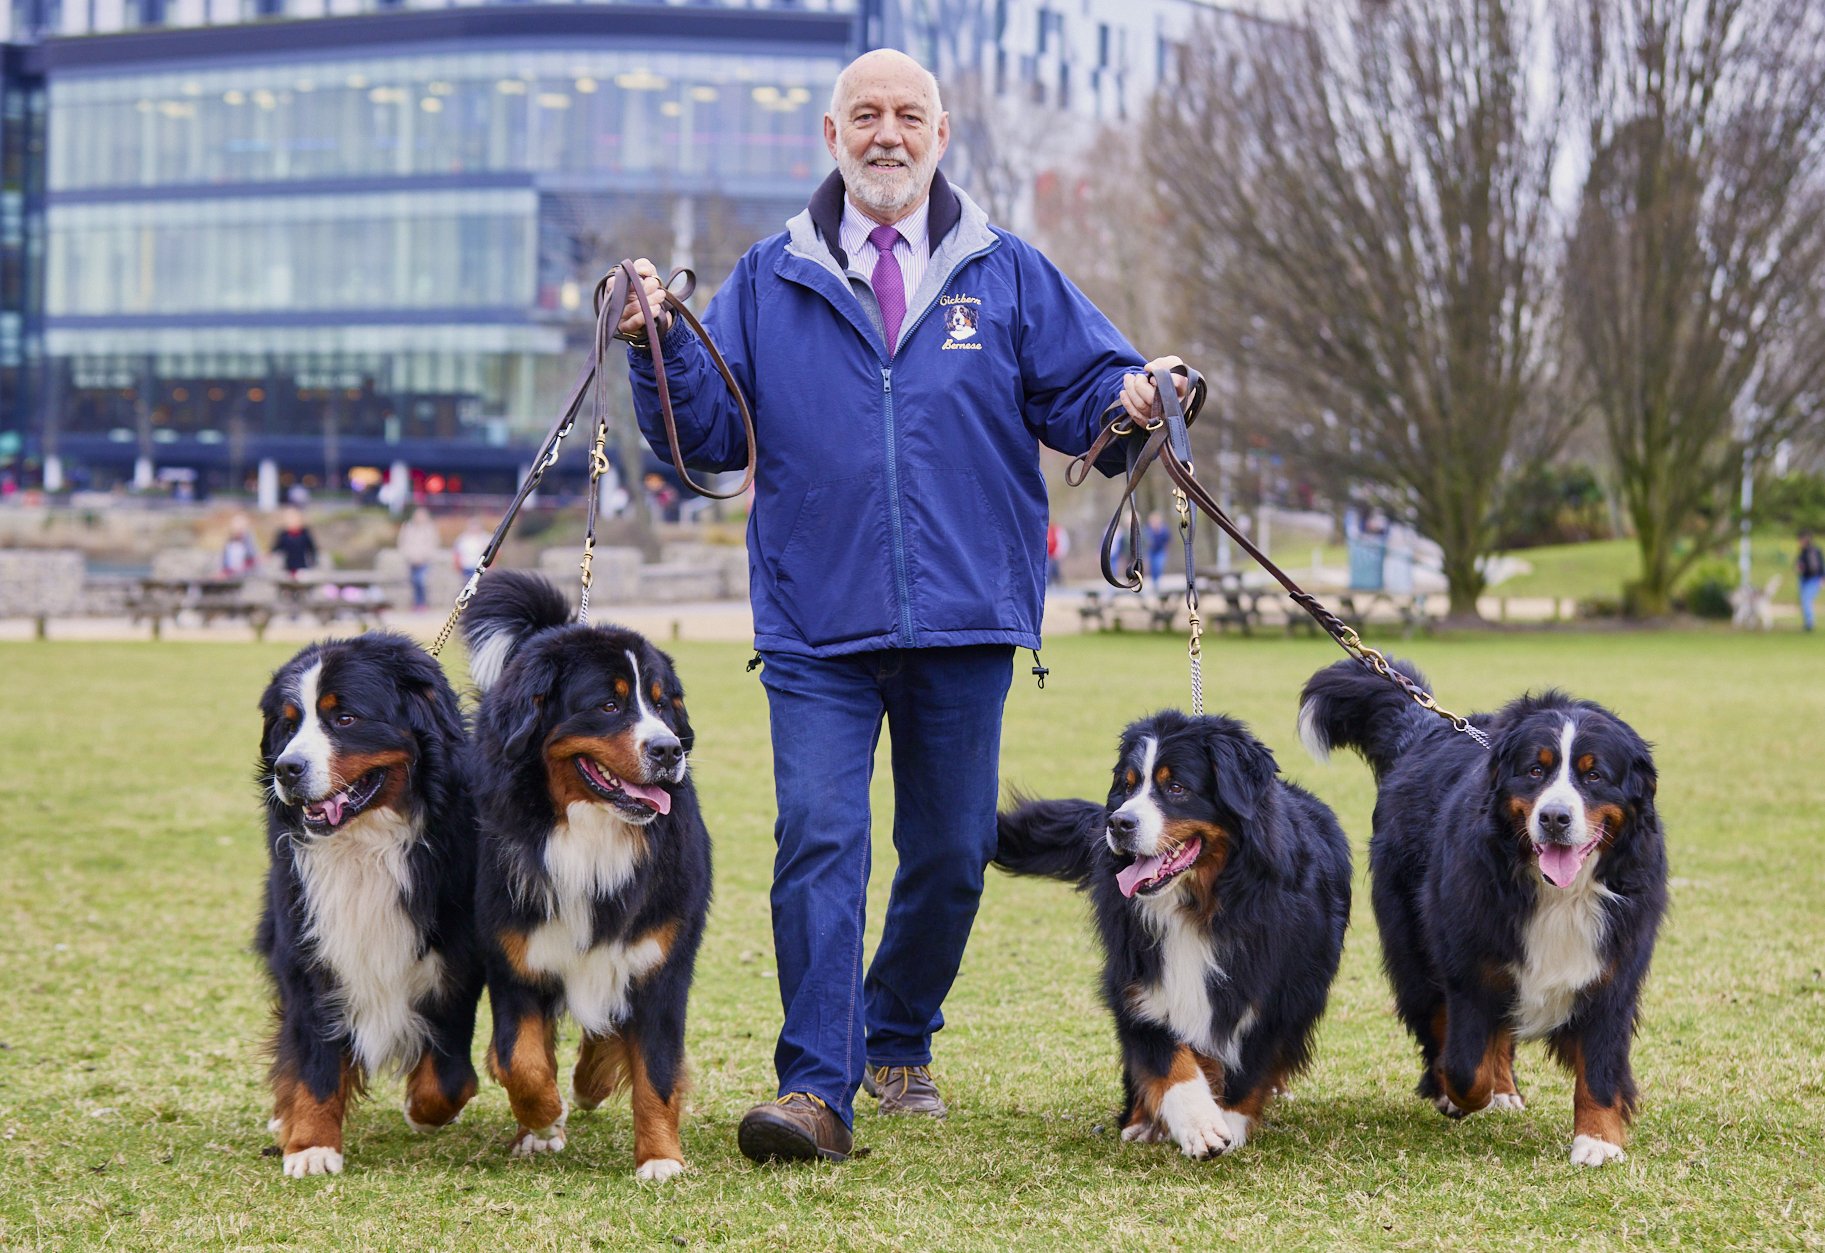  {dats} Copyright: Flick.digitalFree for editorial use image, please credit: Dave Phillips/ Flick.digitalBernese Moutain dogs arriving at Crufts 2022 at the NEC in Birmingham today.The world’s greatest dog show, Crufts, is taking place from 10th – 13